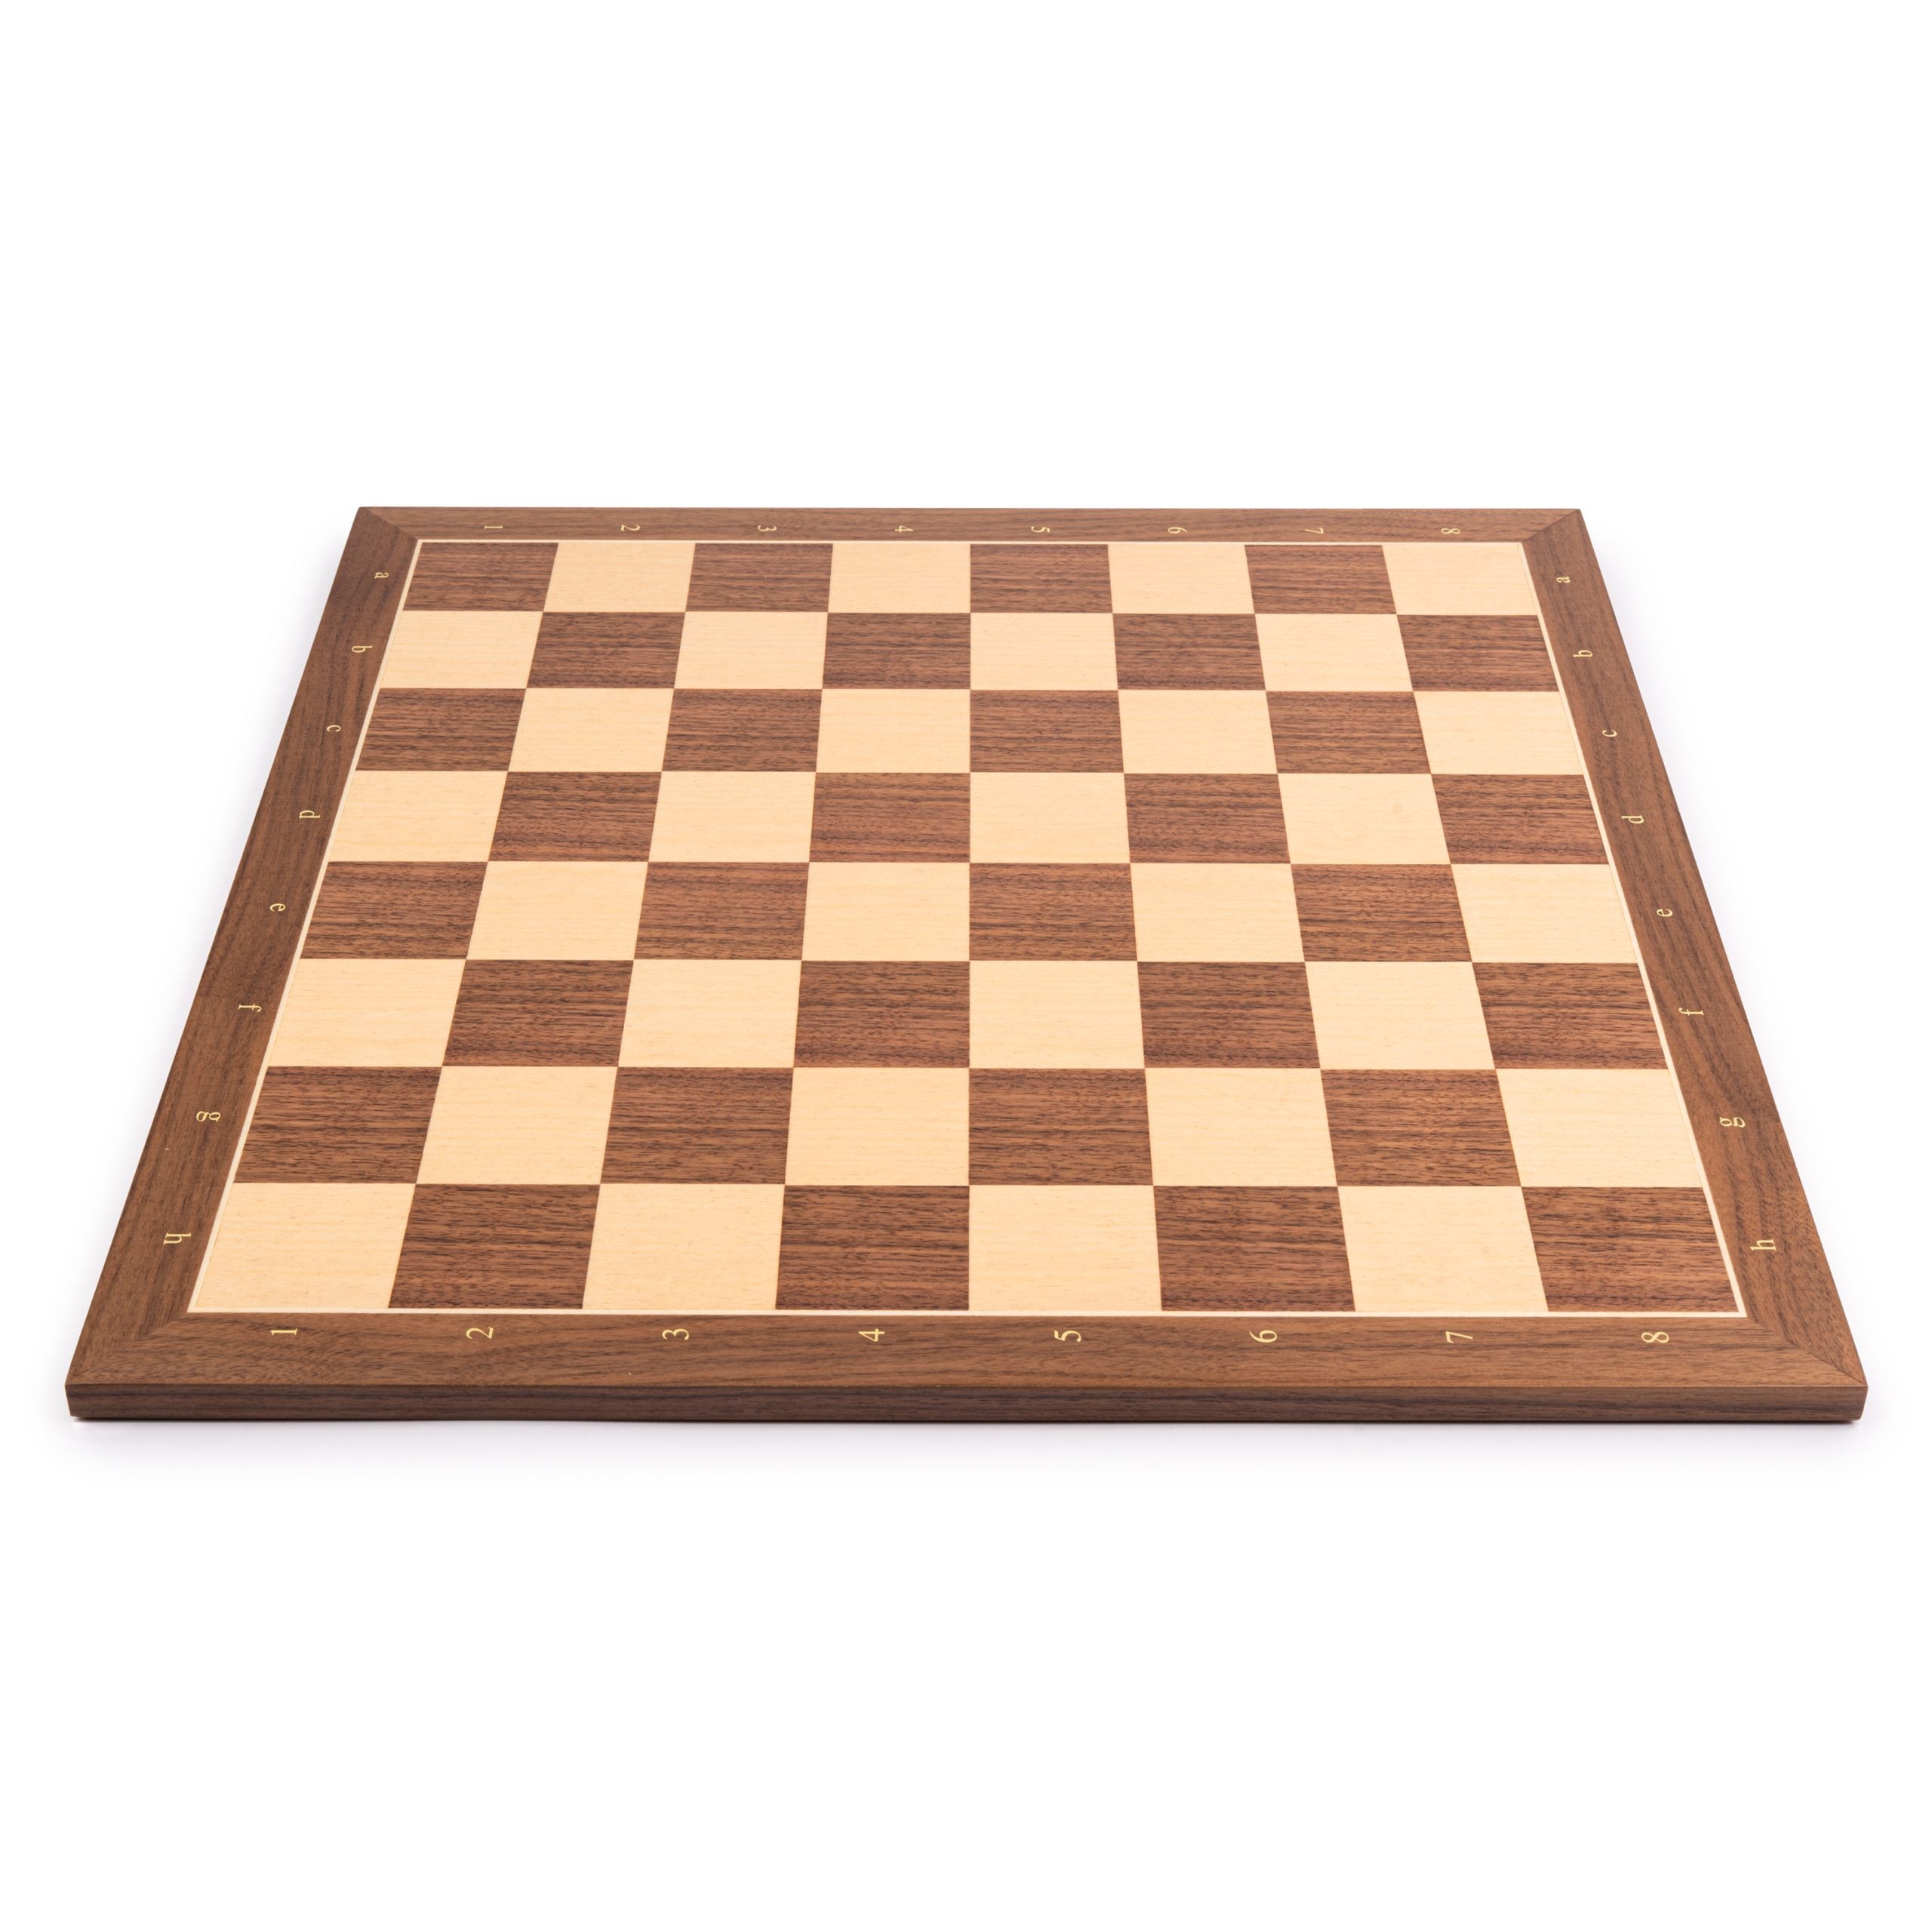 High-quality walnut wooden board with notation, 50mm field size